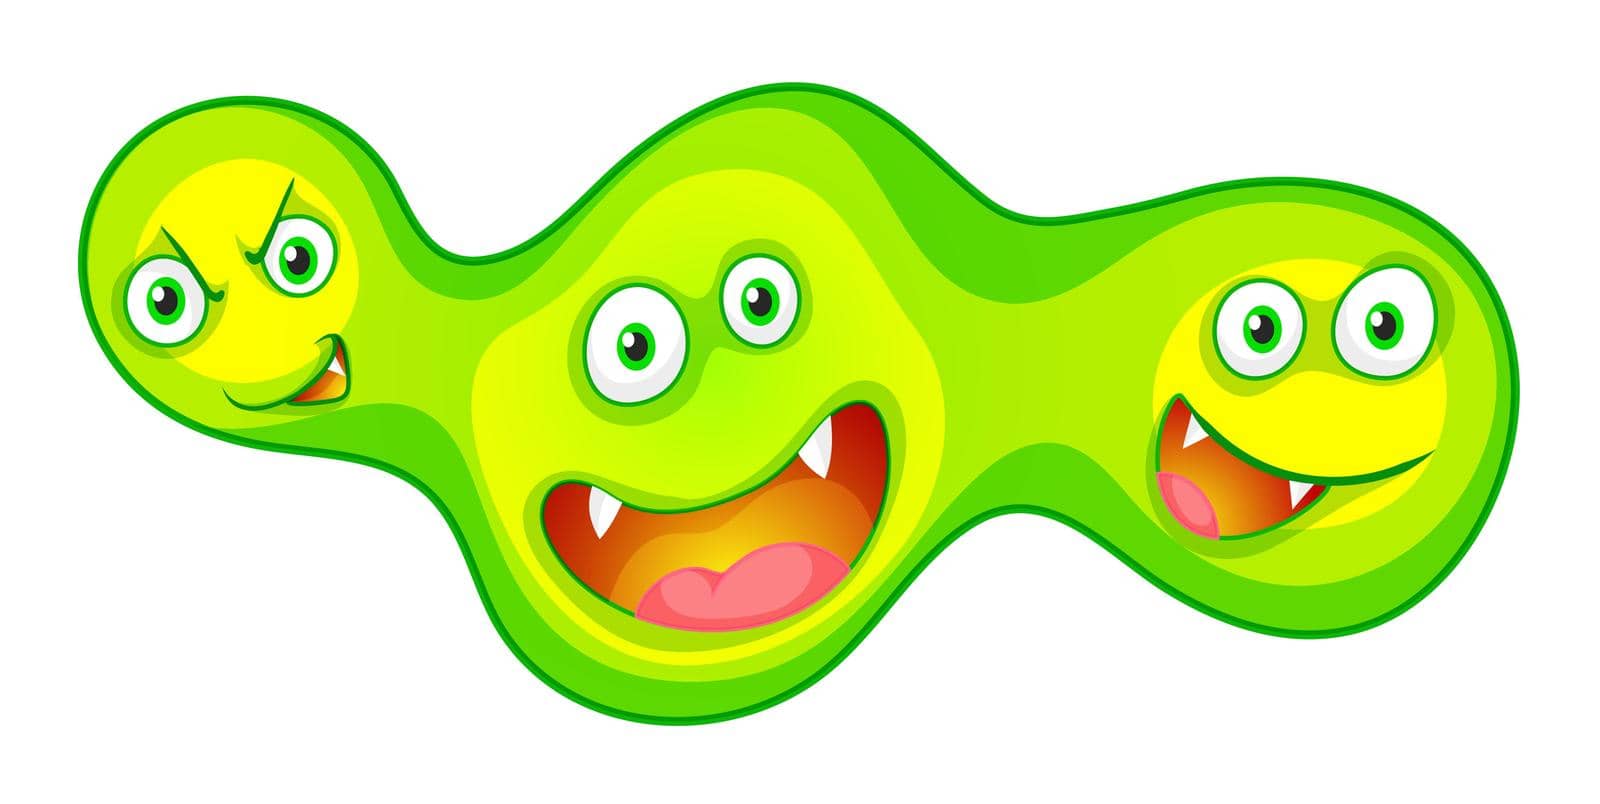 Bacteria with monster faces illustration